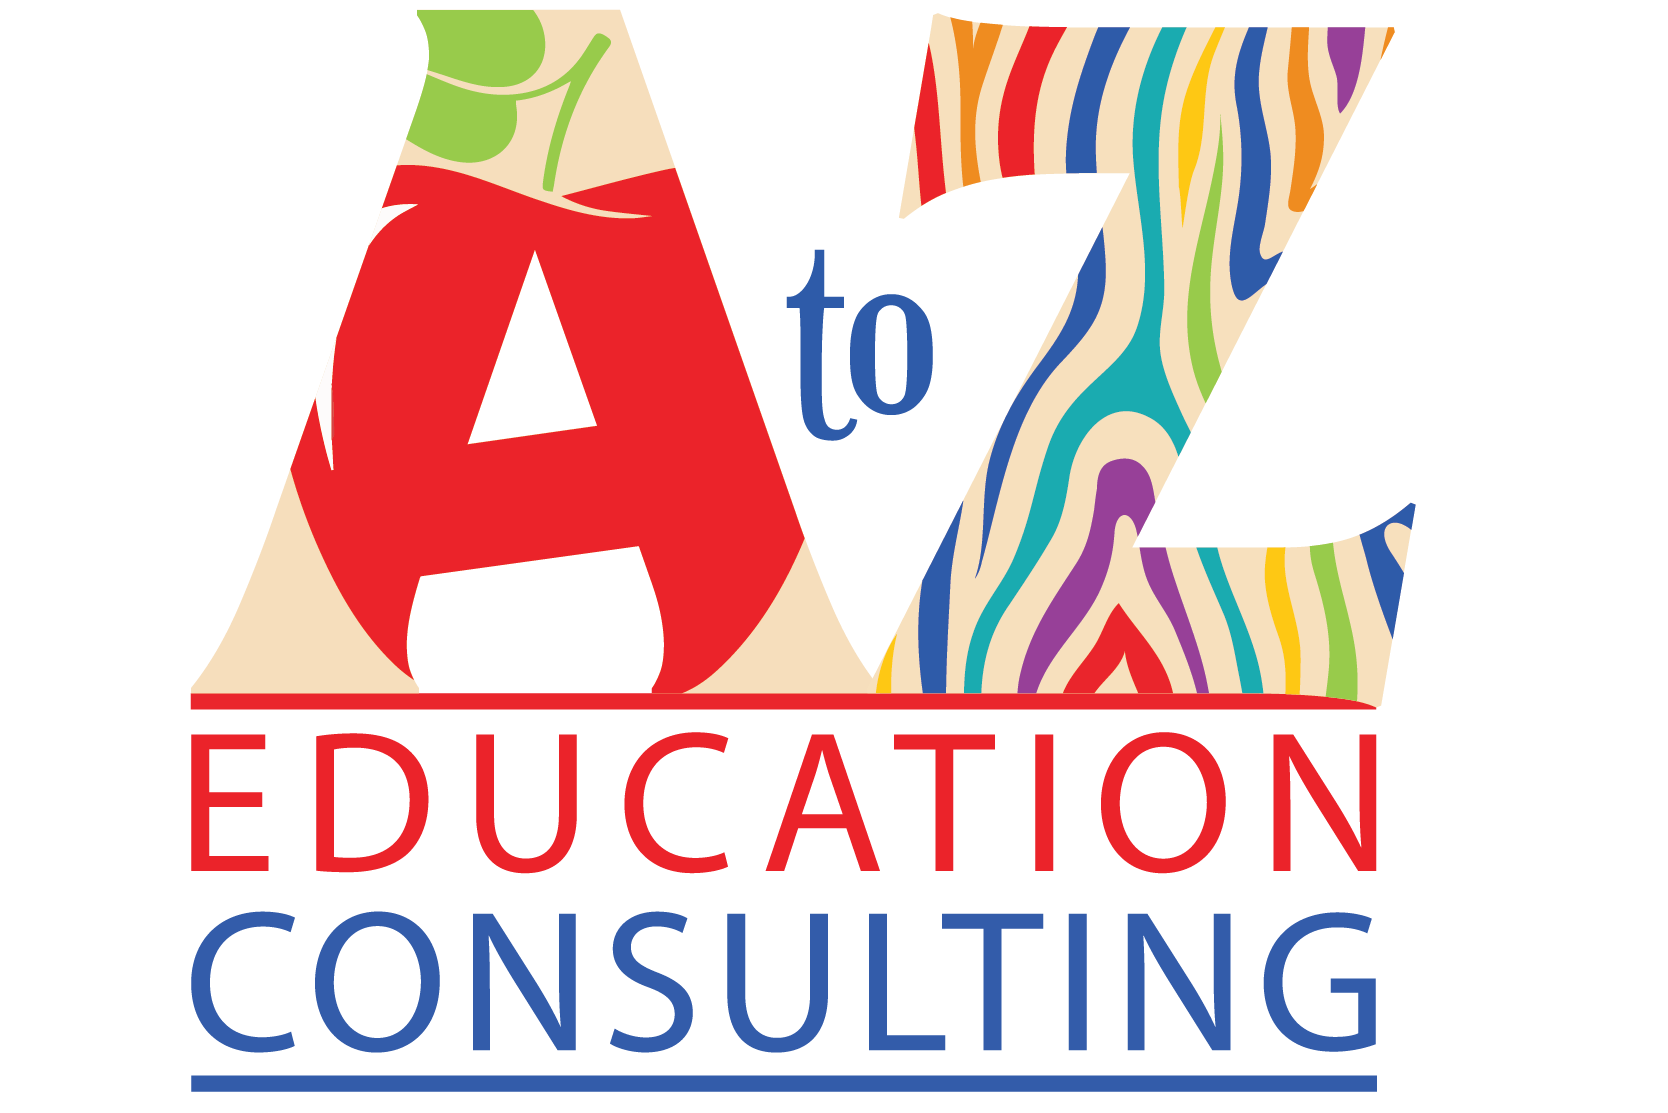 A to Z Education Consulting: logo